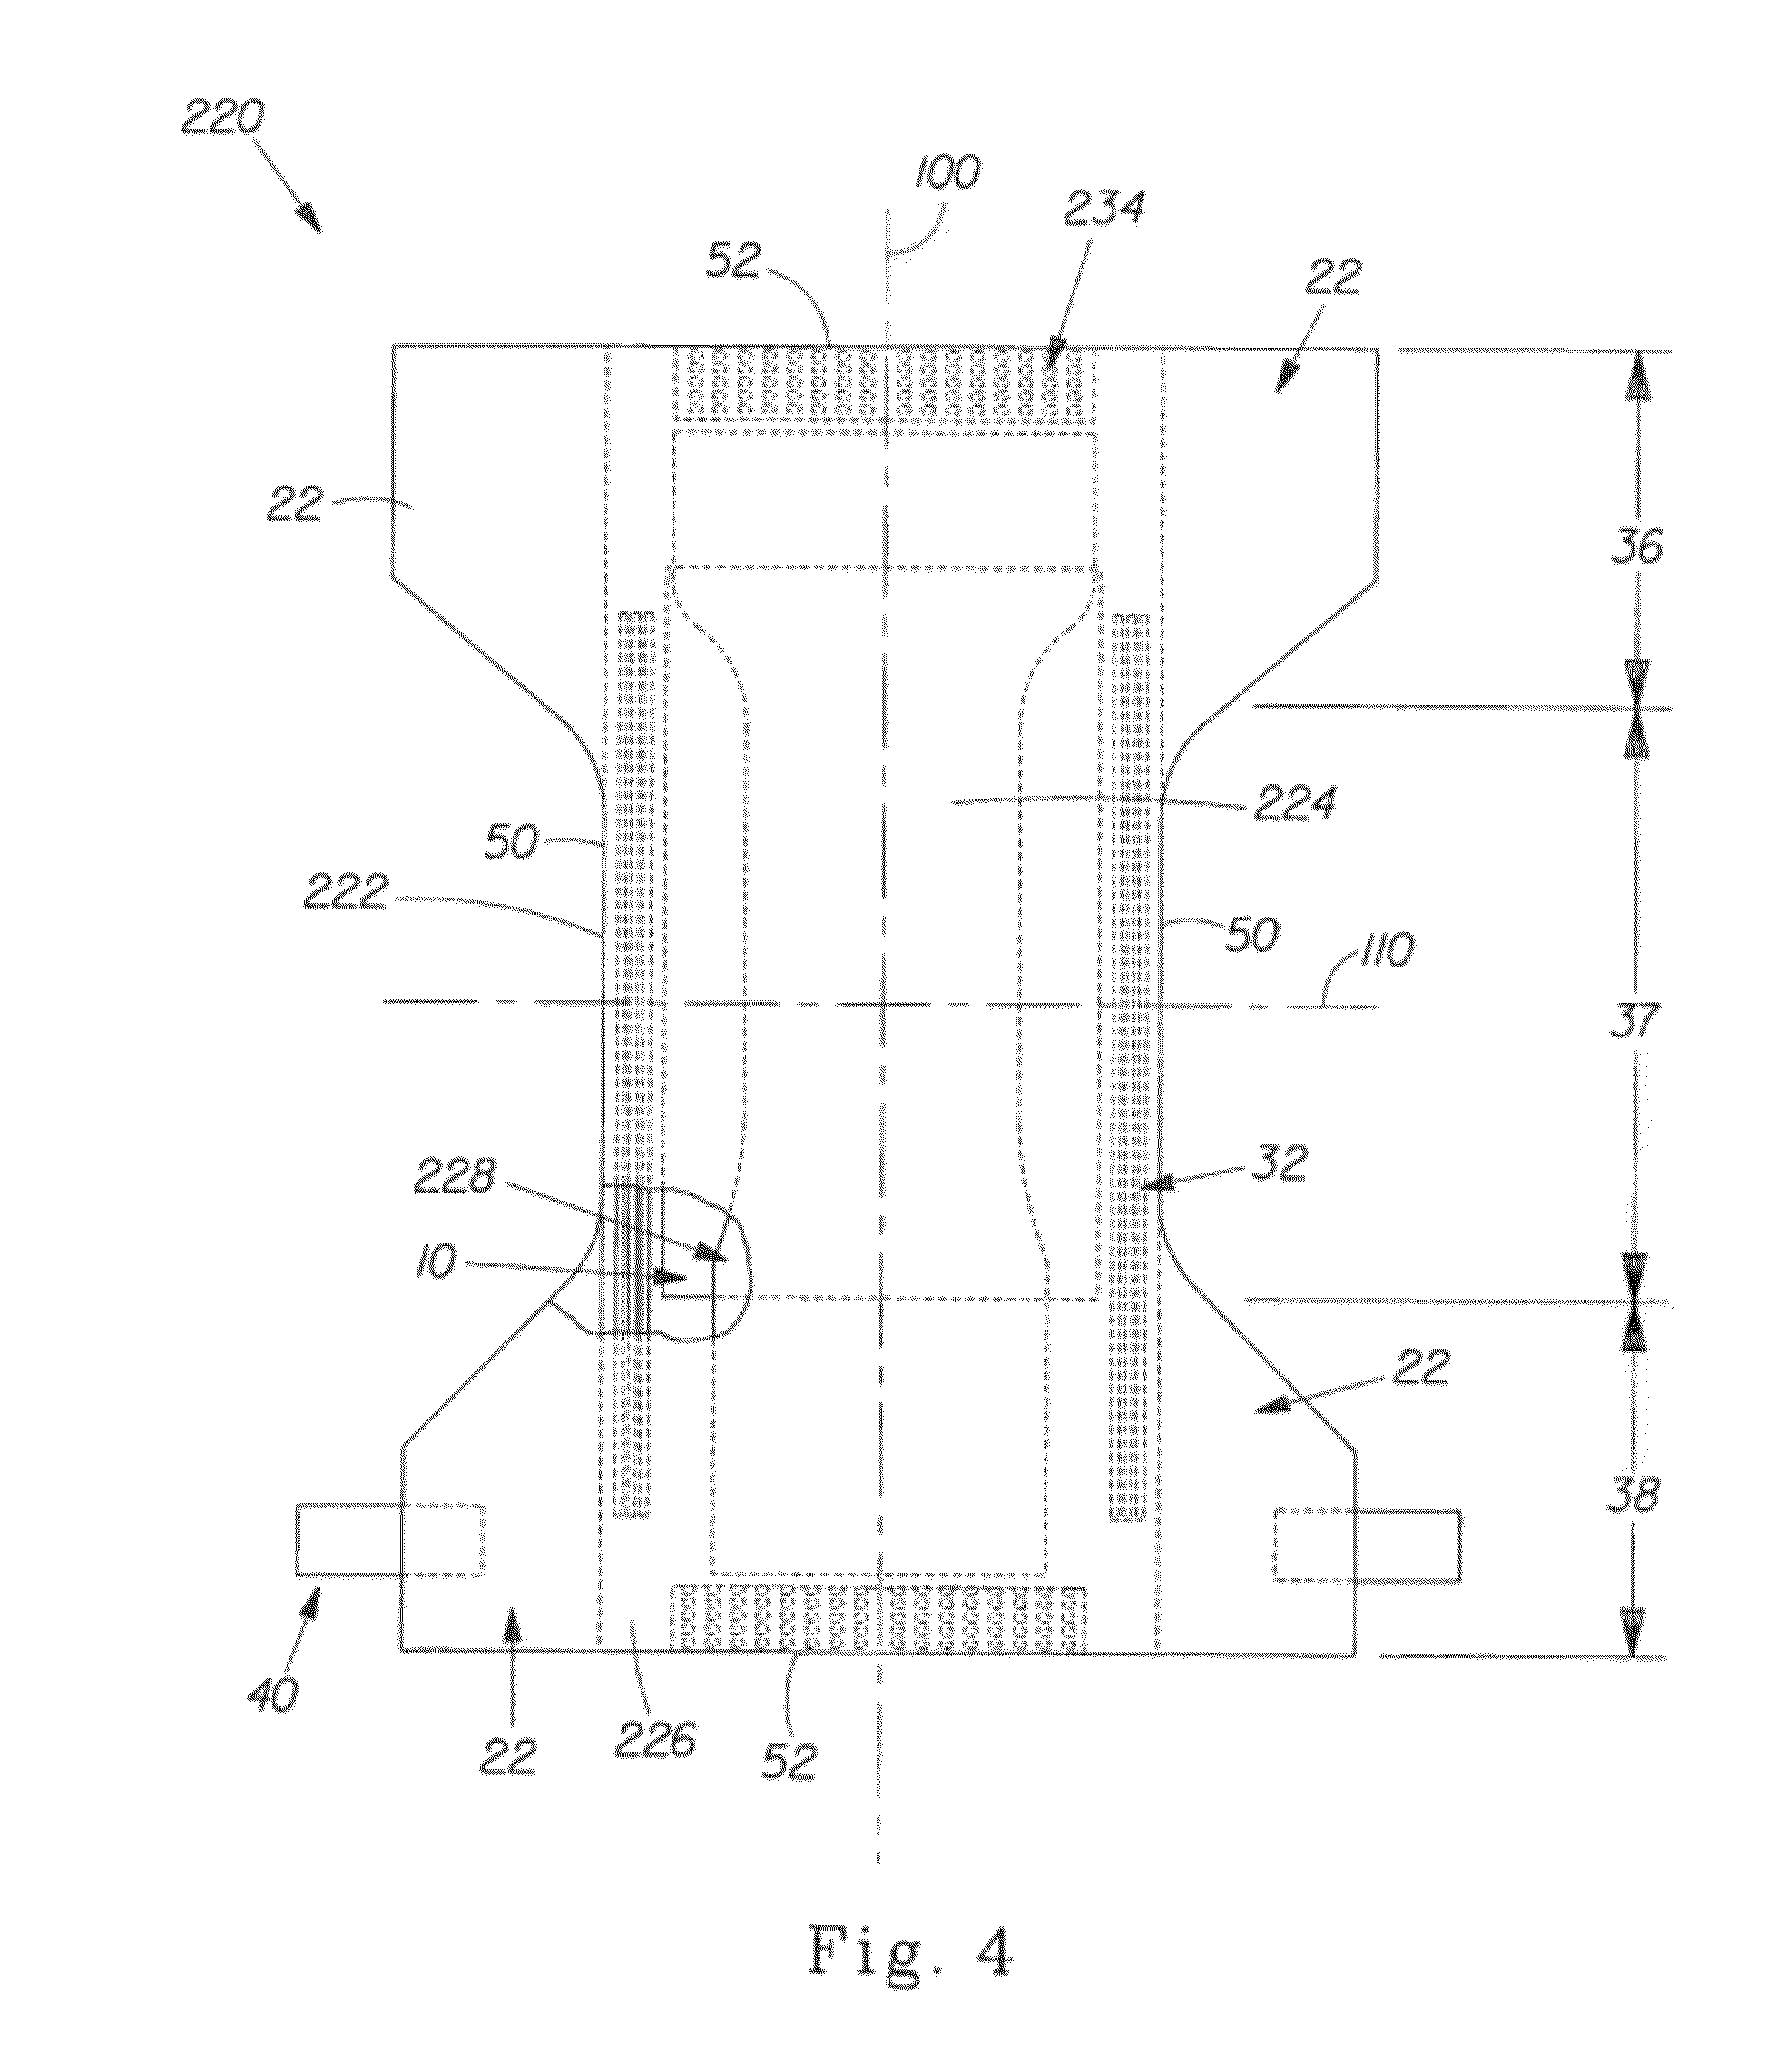 Disposable absorbent article containing an adhesively bonded elastic member